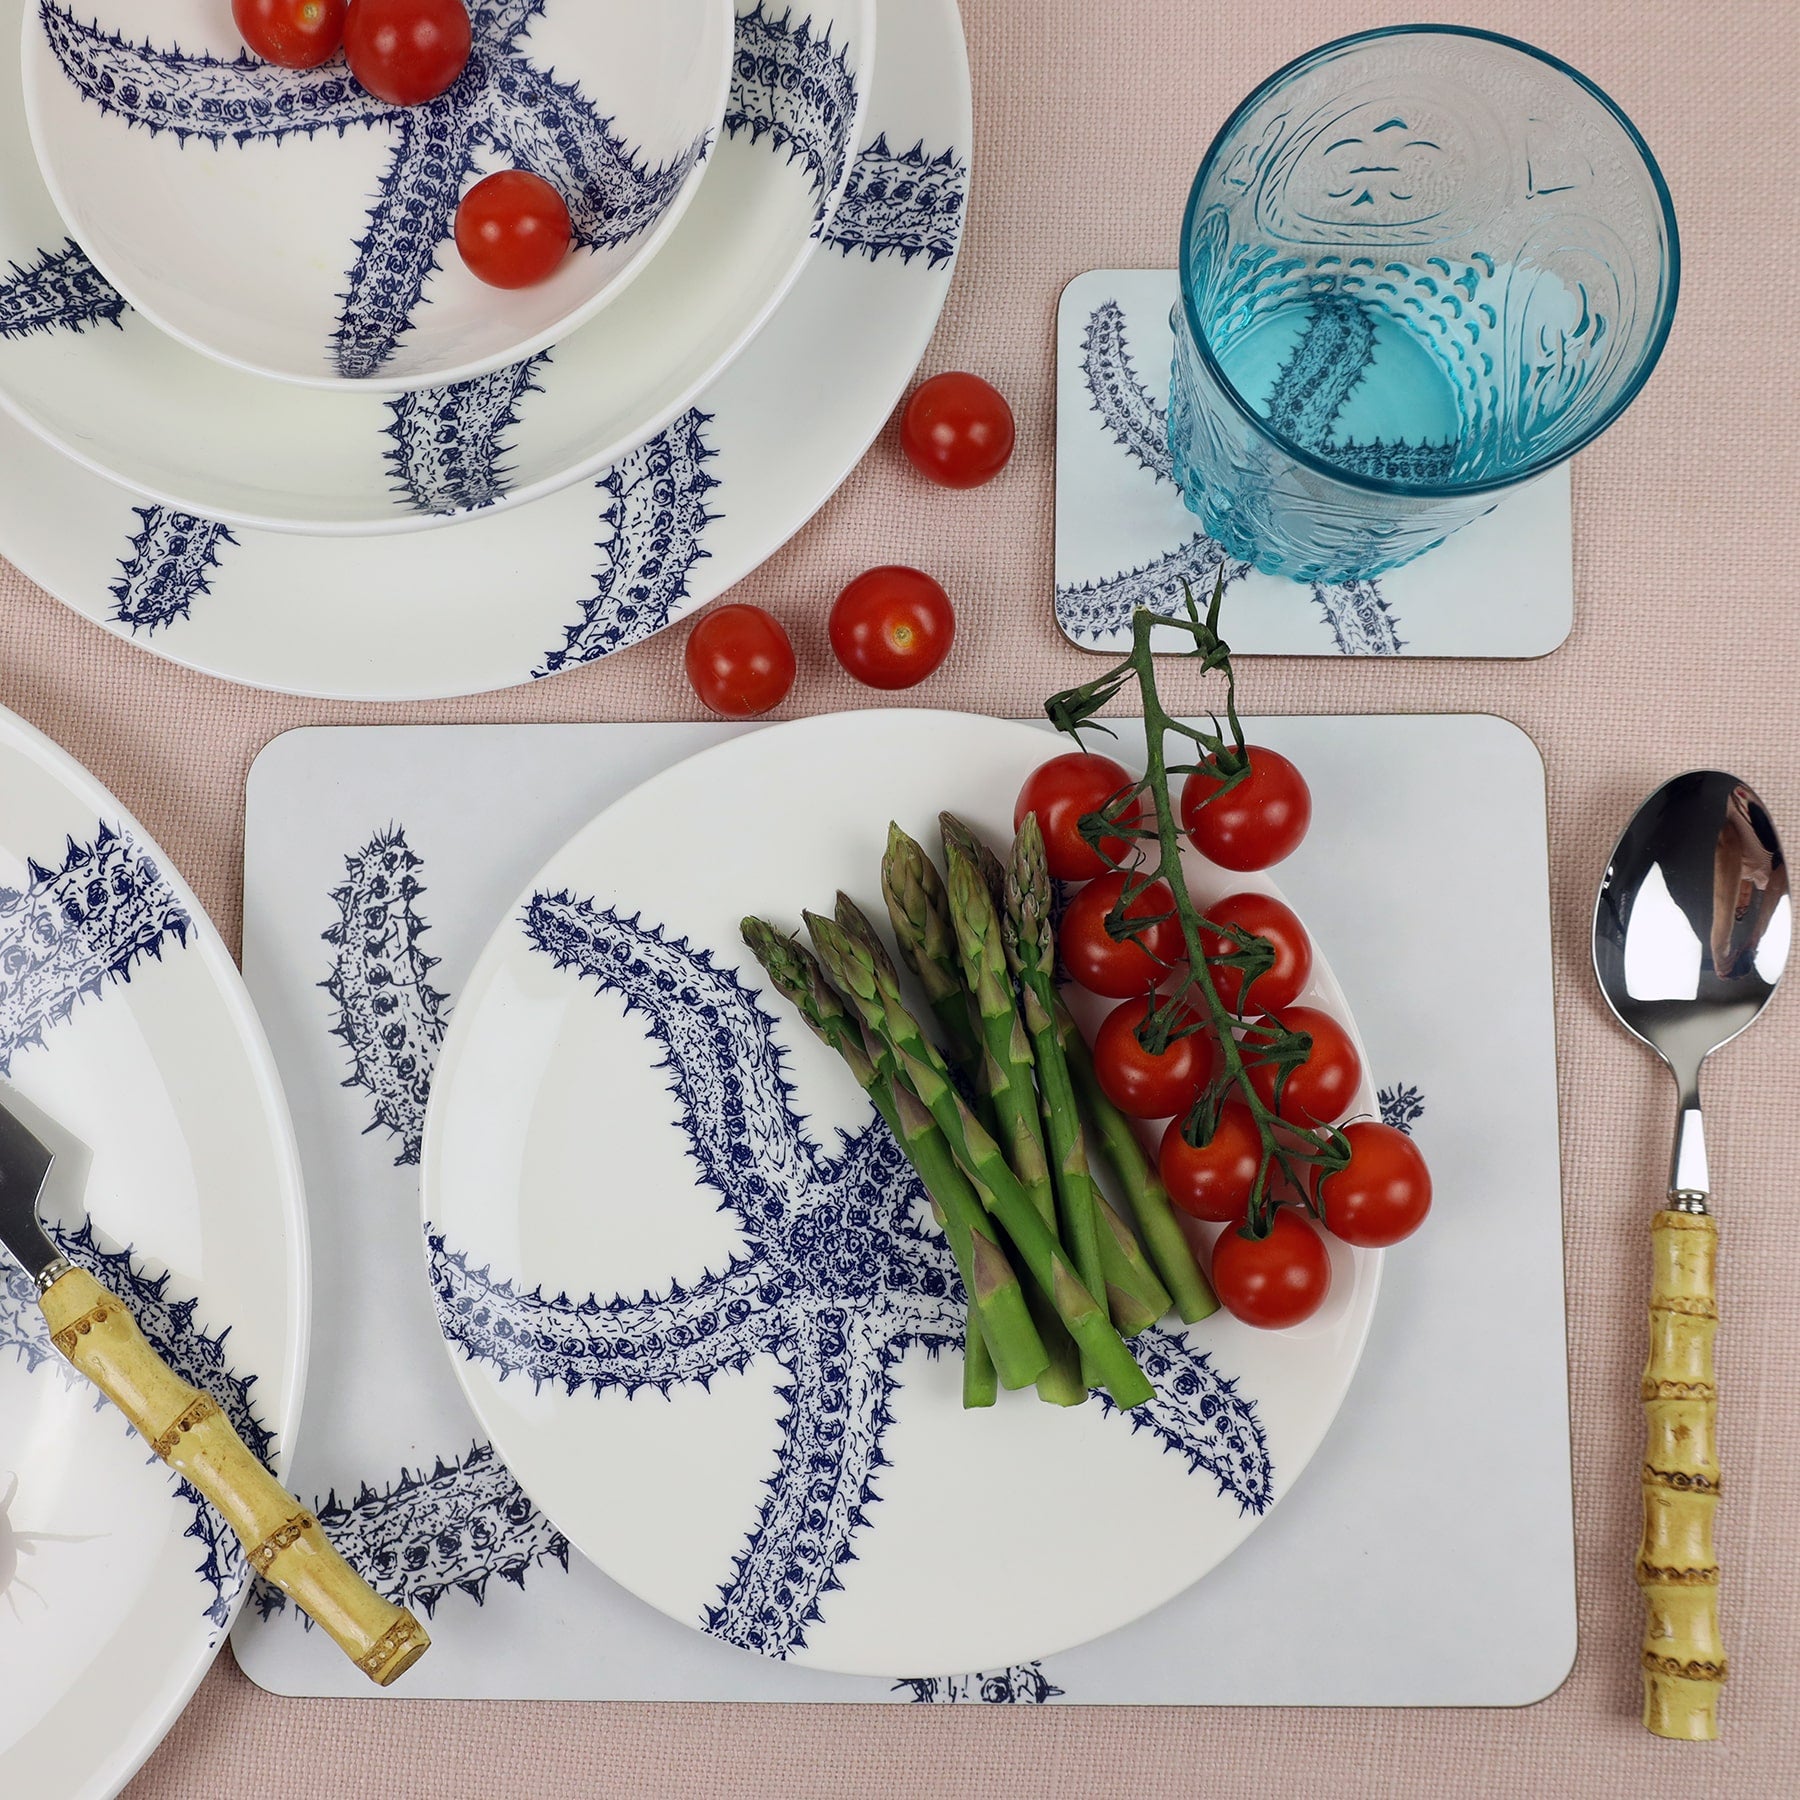 Starfish Placemat and matching Coaster placed on a table with bamboo cutlery.On the table is other tableware items,on the plates are tomatoes and some asparagus.